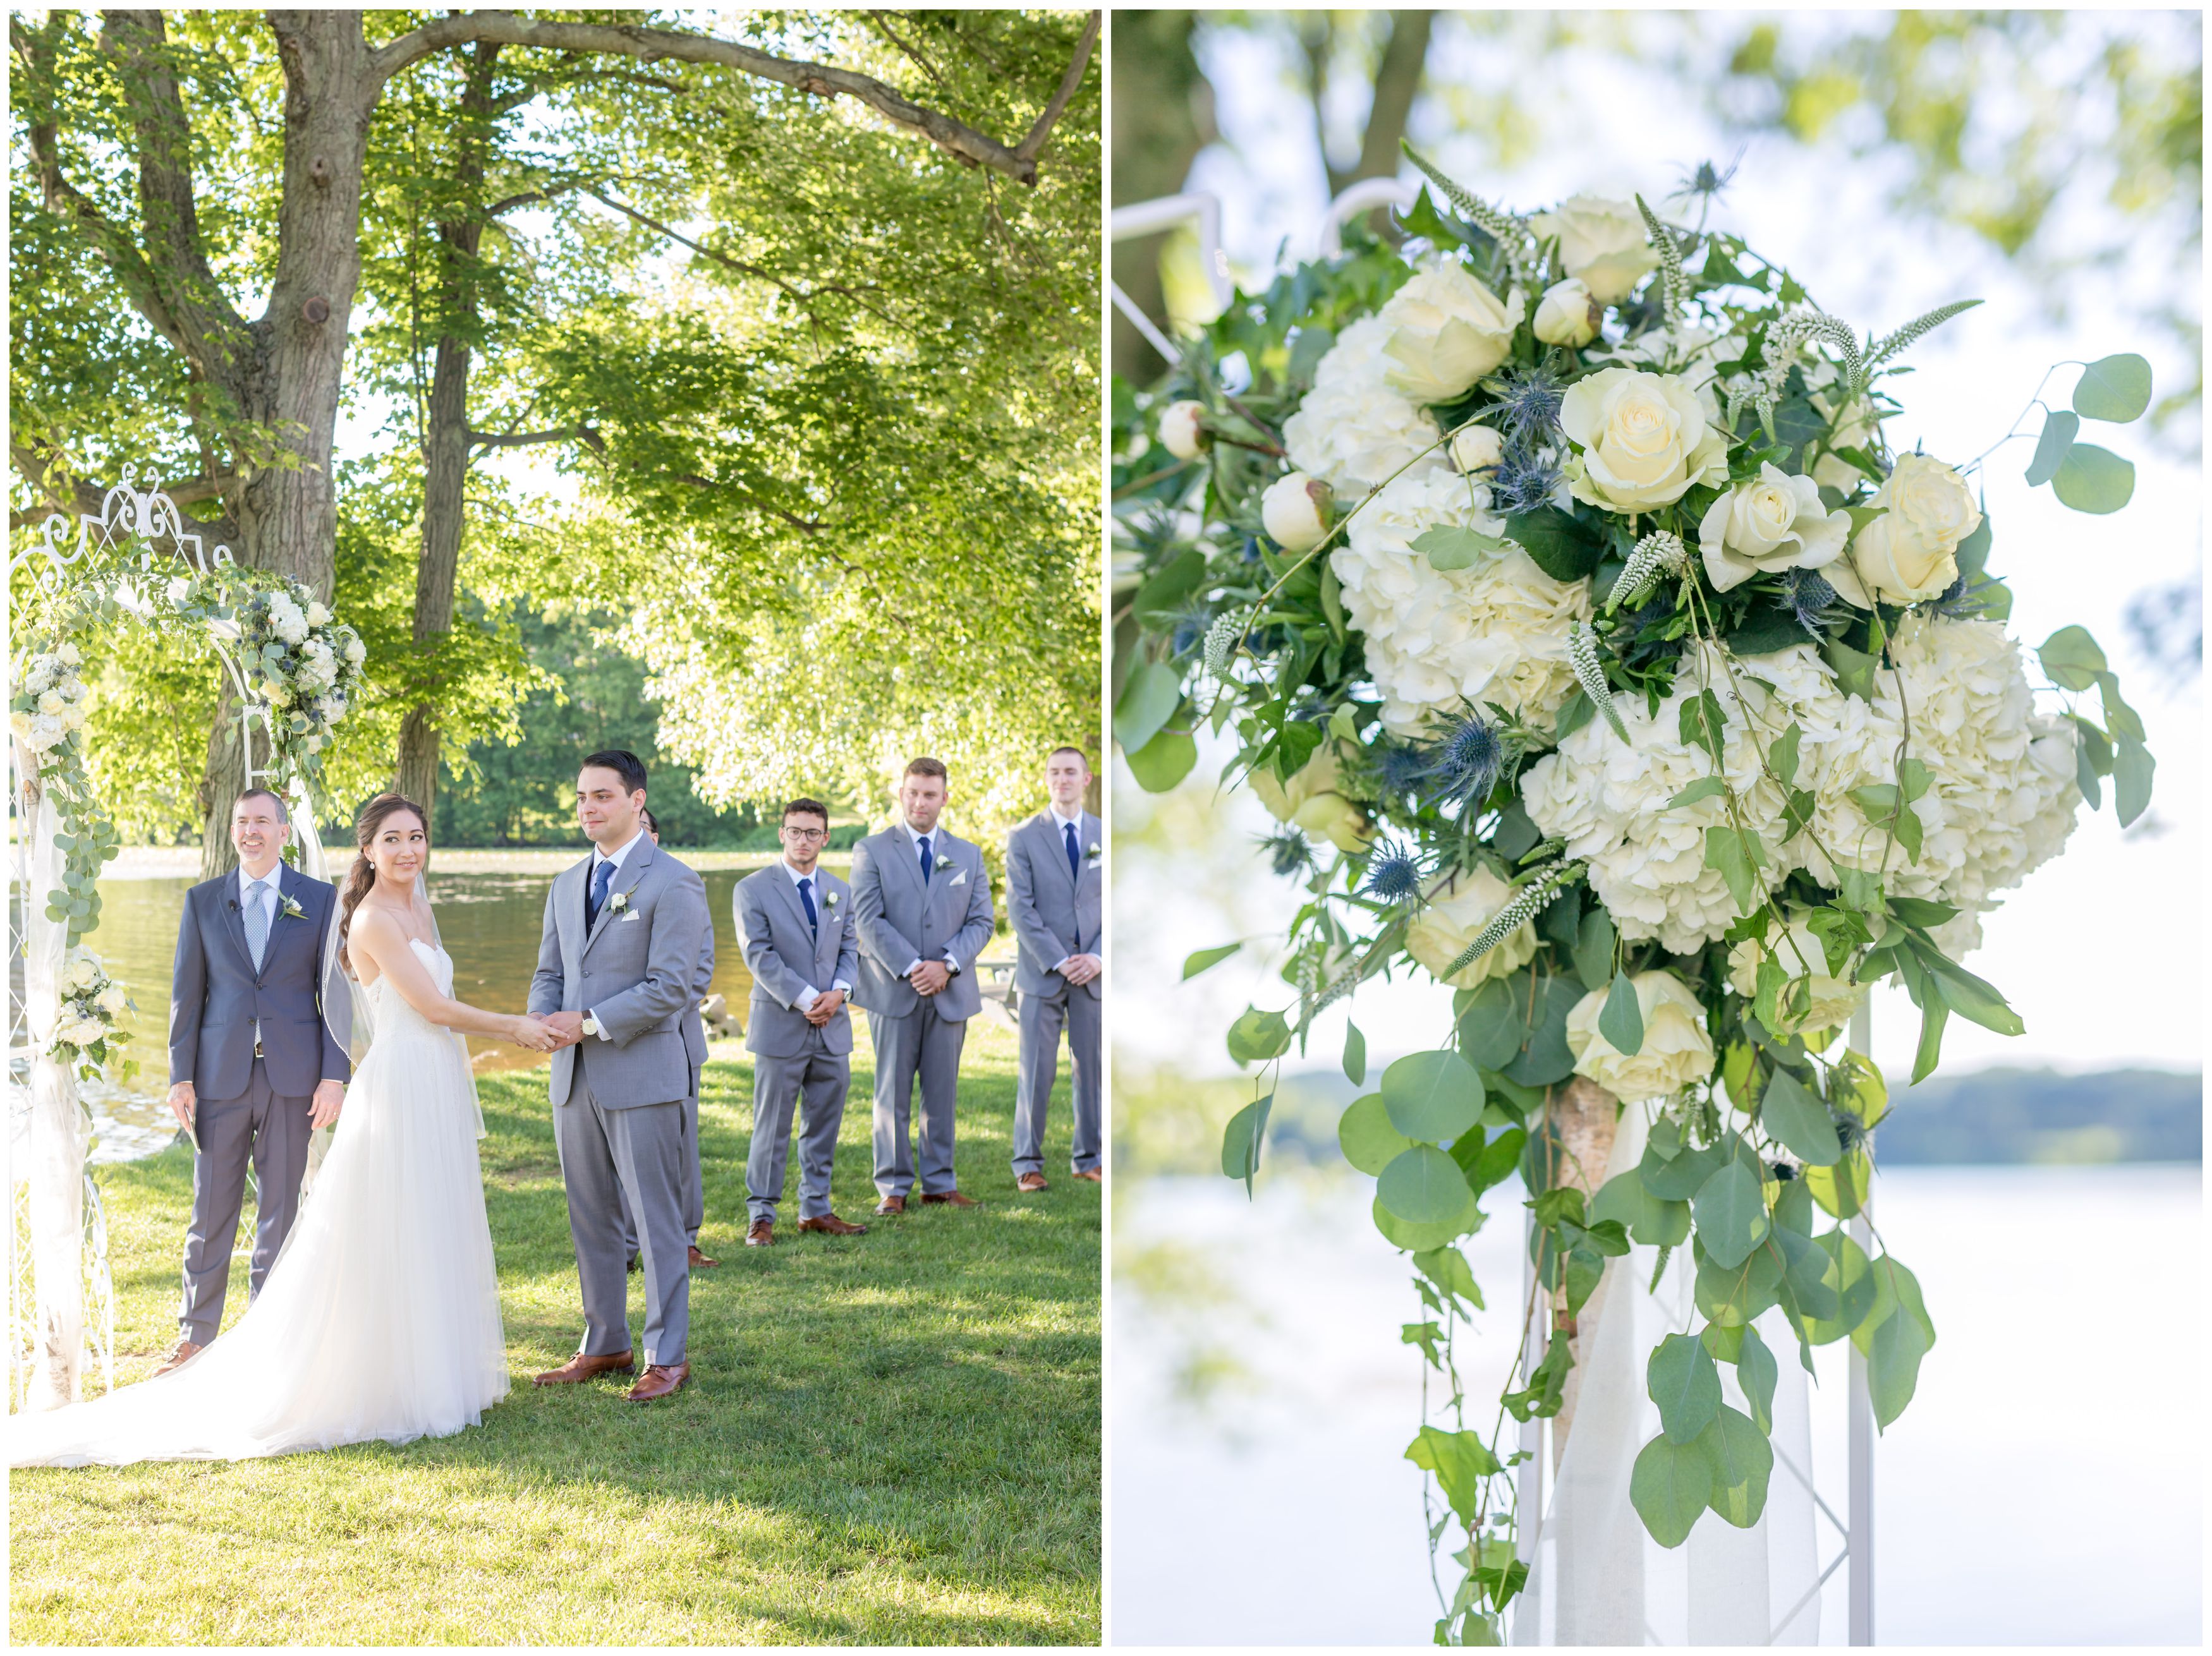 Outdoor lakeside ceremony details at Indian Trail Club